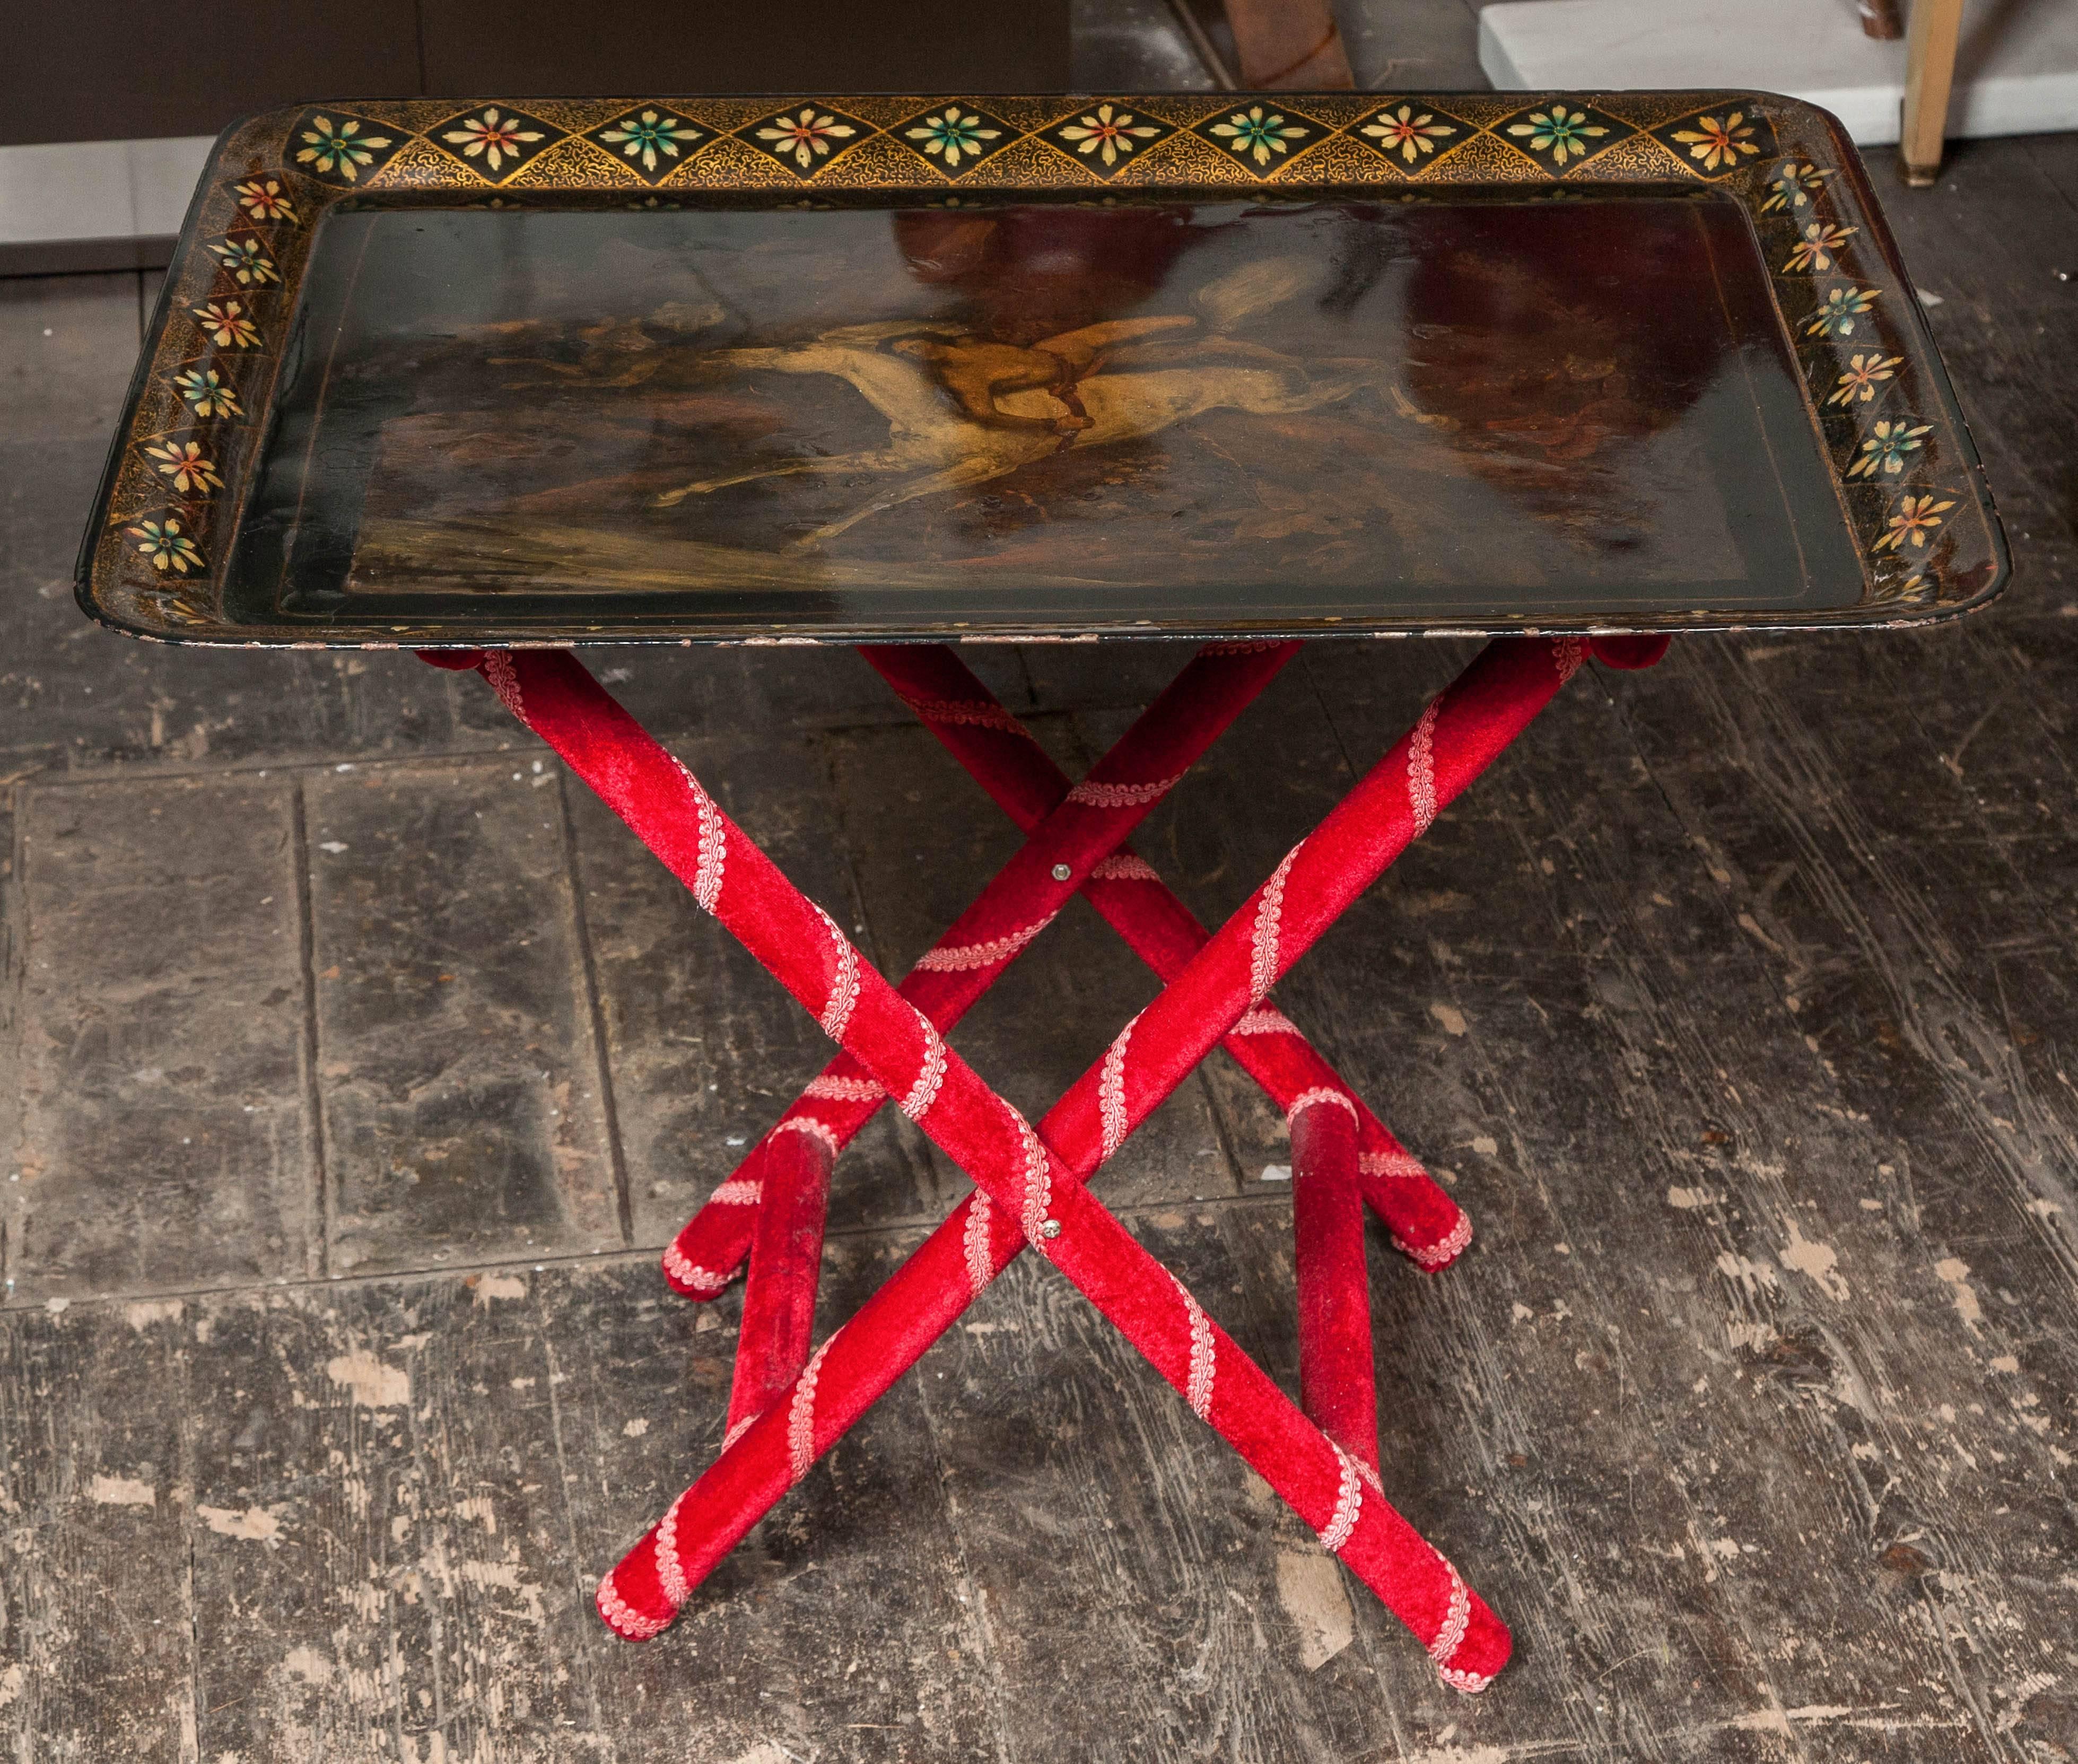 Folding metal tray with upholstered stand in red velvet.
Title: Mazzepa and the wolves. After Horace Emile Jean Vernet (1789-1863),
French, circa 1850s.